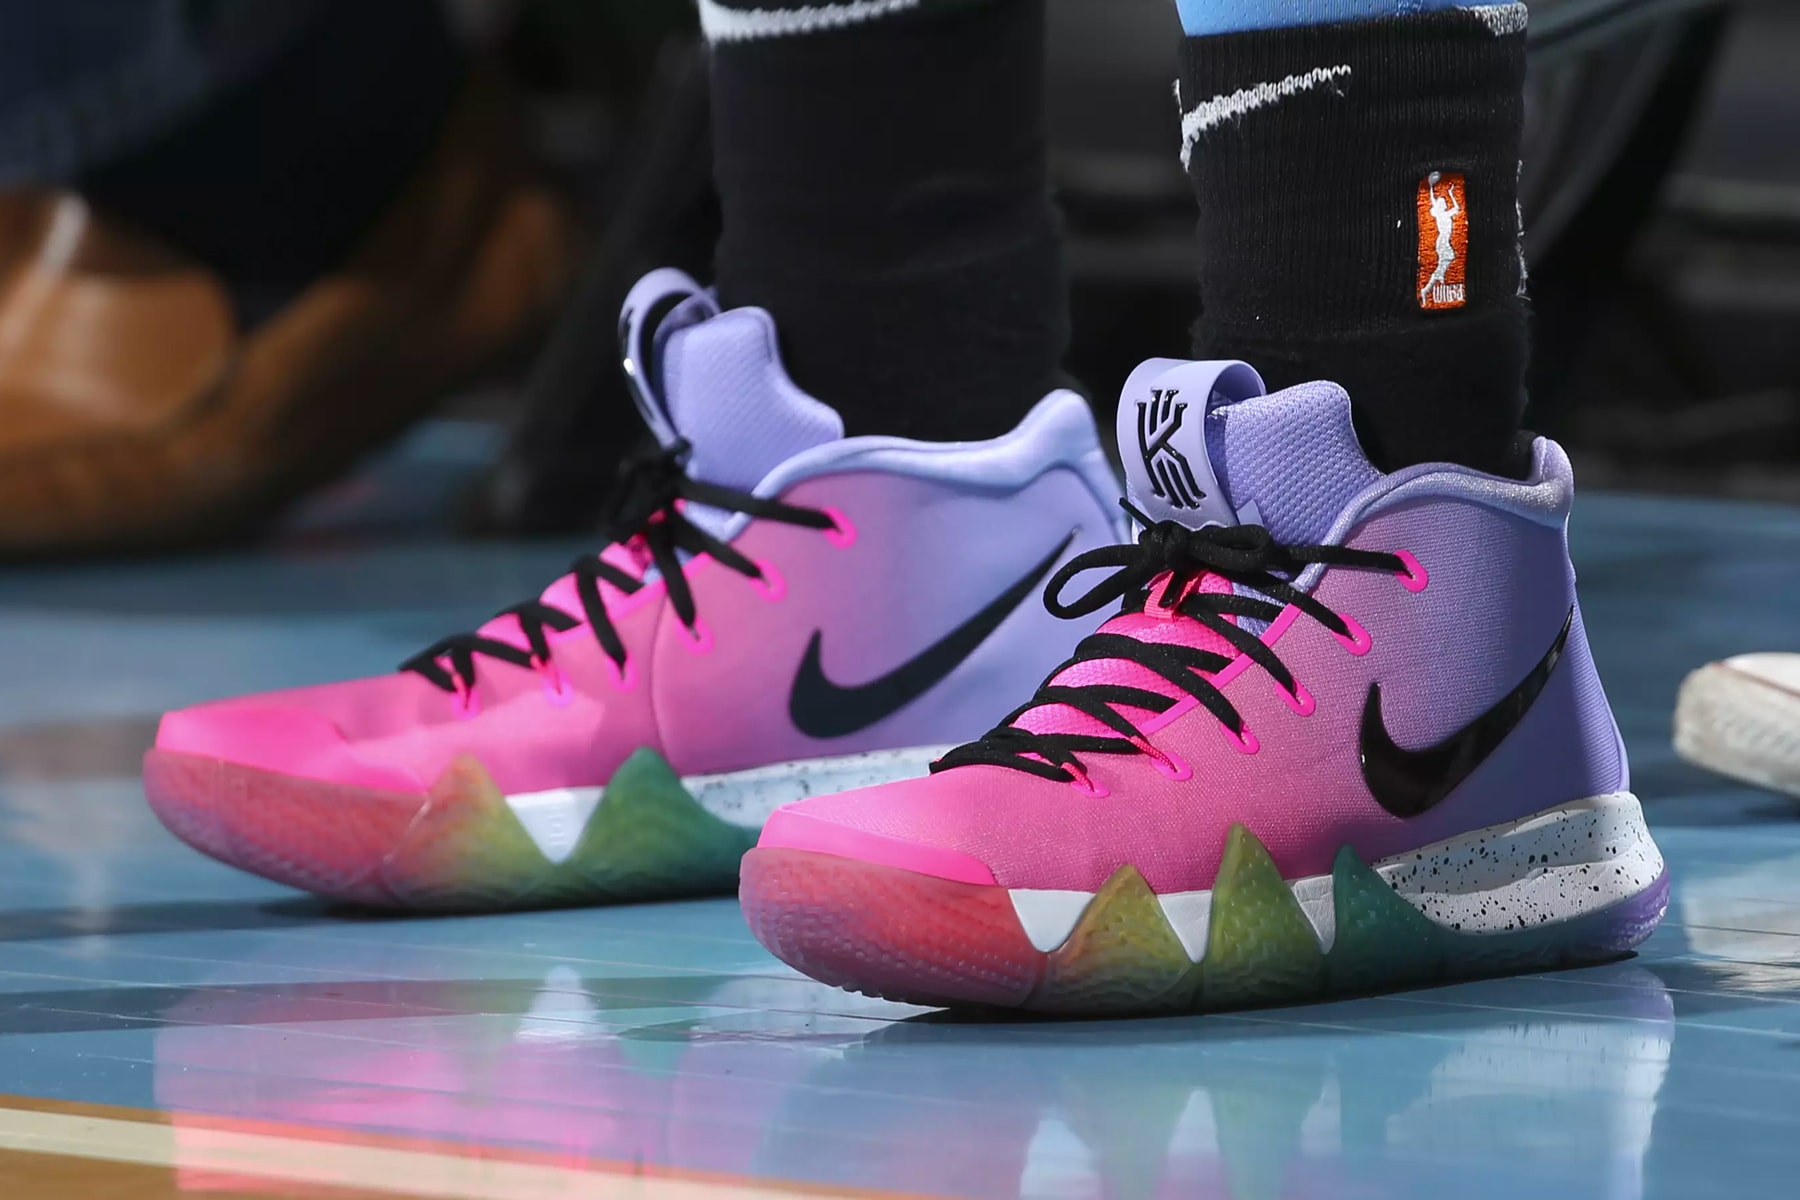 Nike Kyrie 4 BETRUE Gabby Williams Pride LGBTQ Chicago Sky Release Information Details Colorway Rainbow